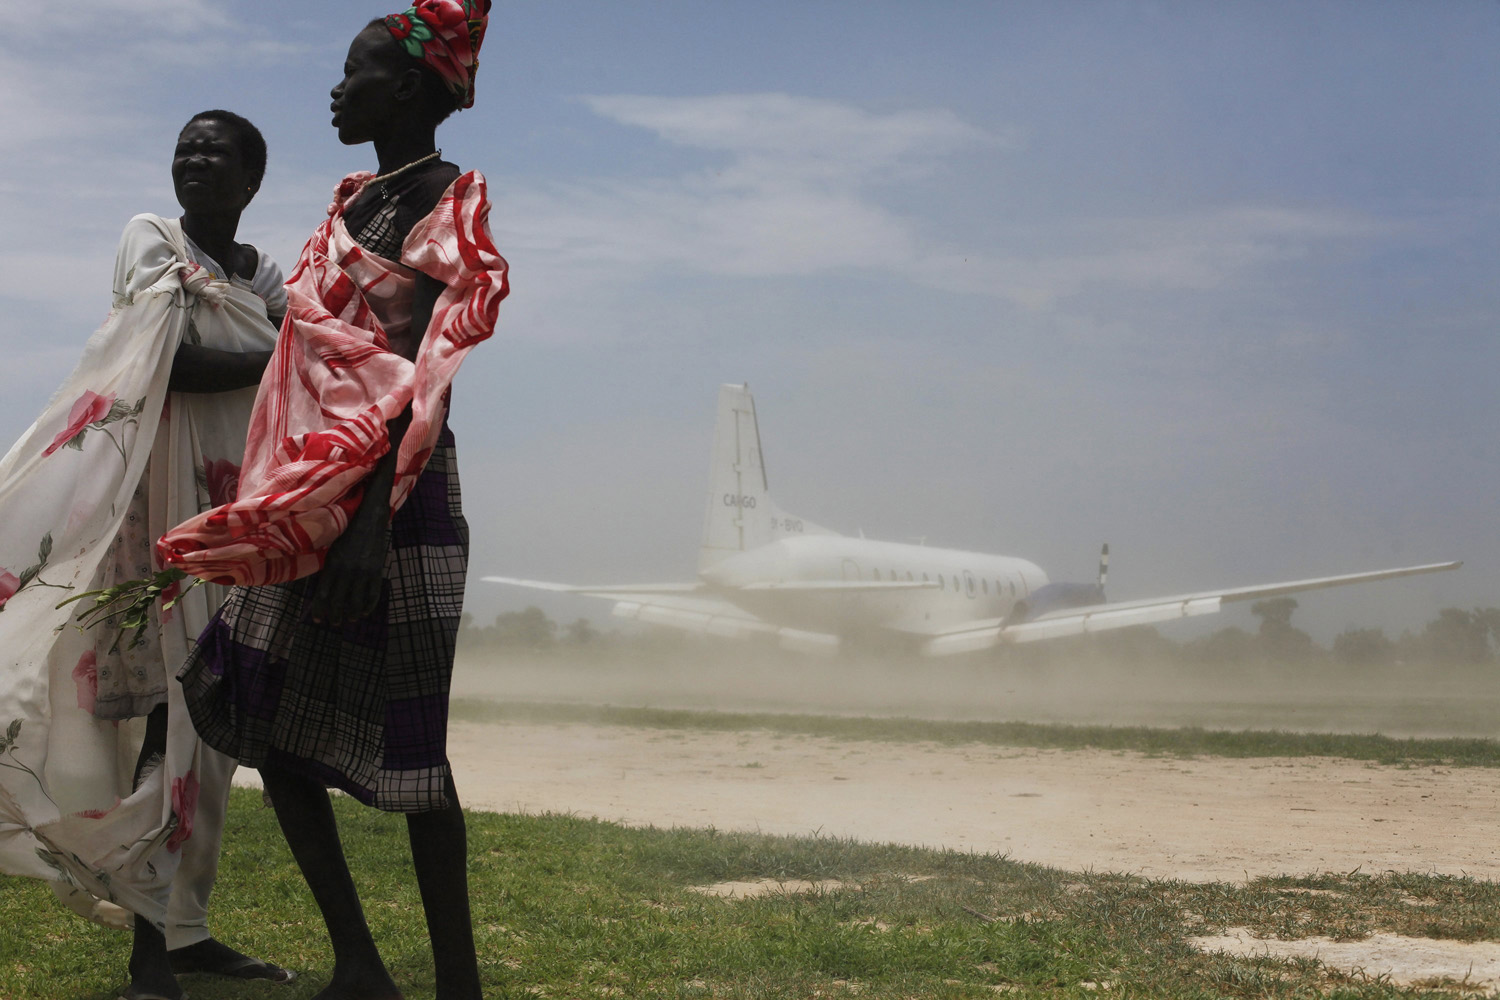 Women try to avoid dust as a plane, carrying nutrition supplements brought in by Medecins Sans Frontieres, lands in Leer